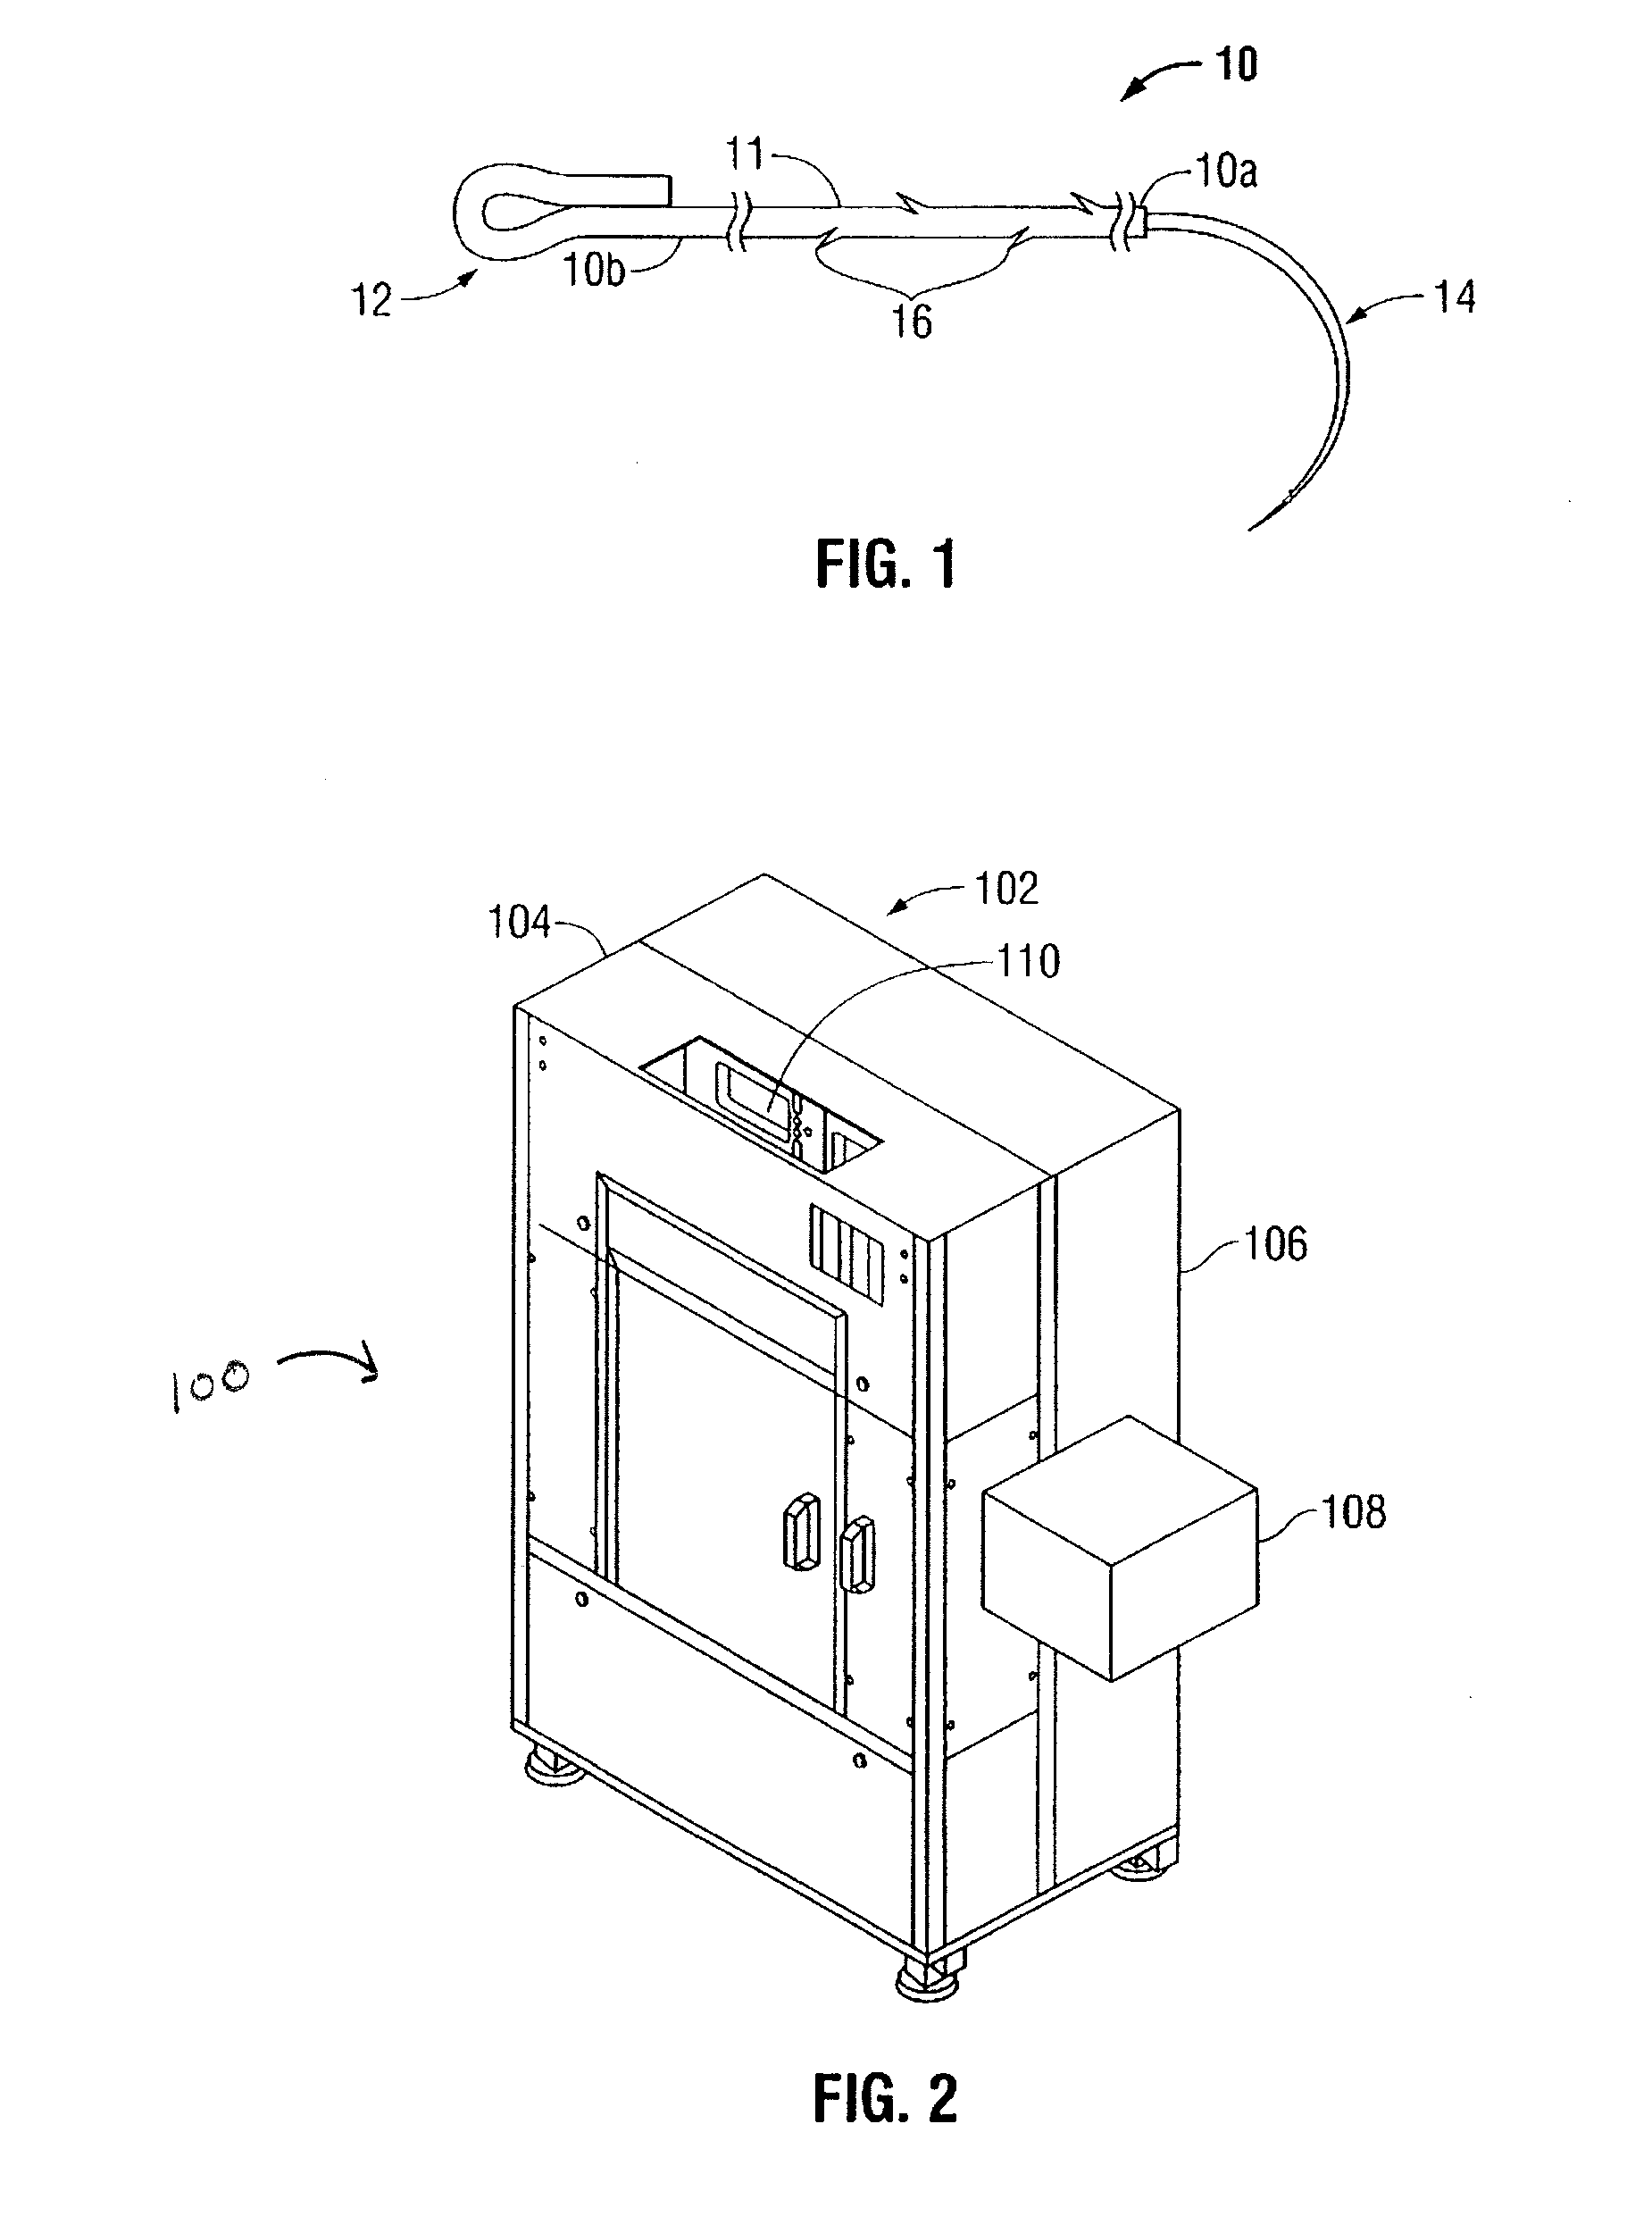 System and Method for Forming Barbs on a Suture